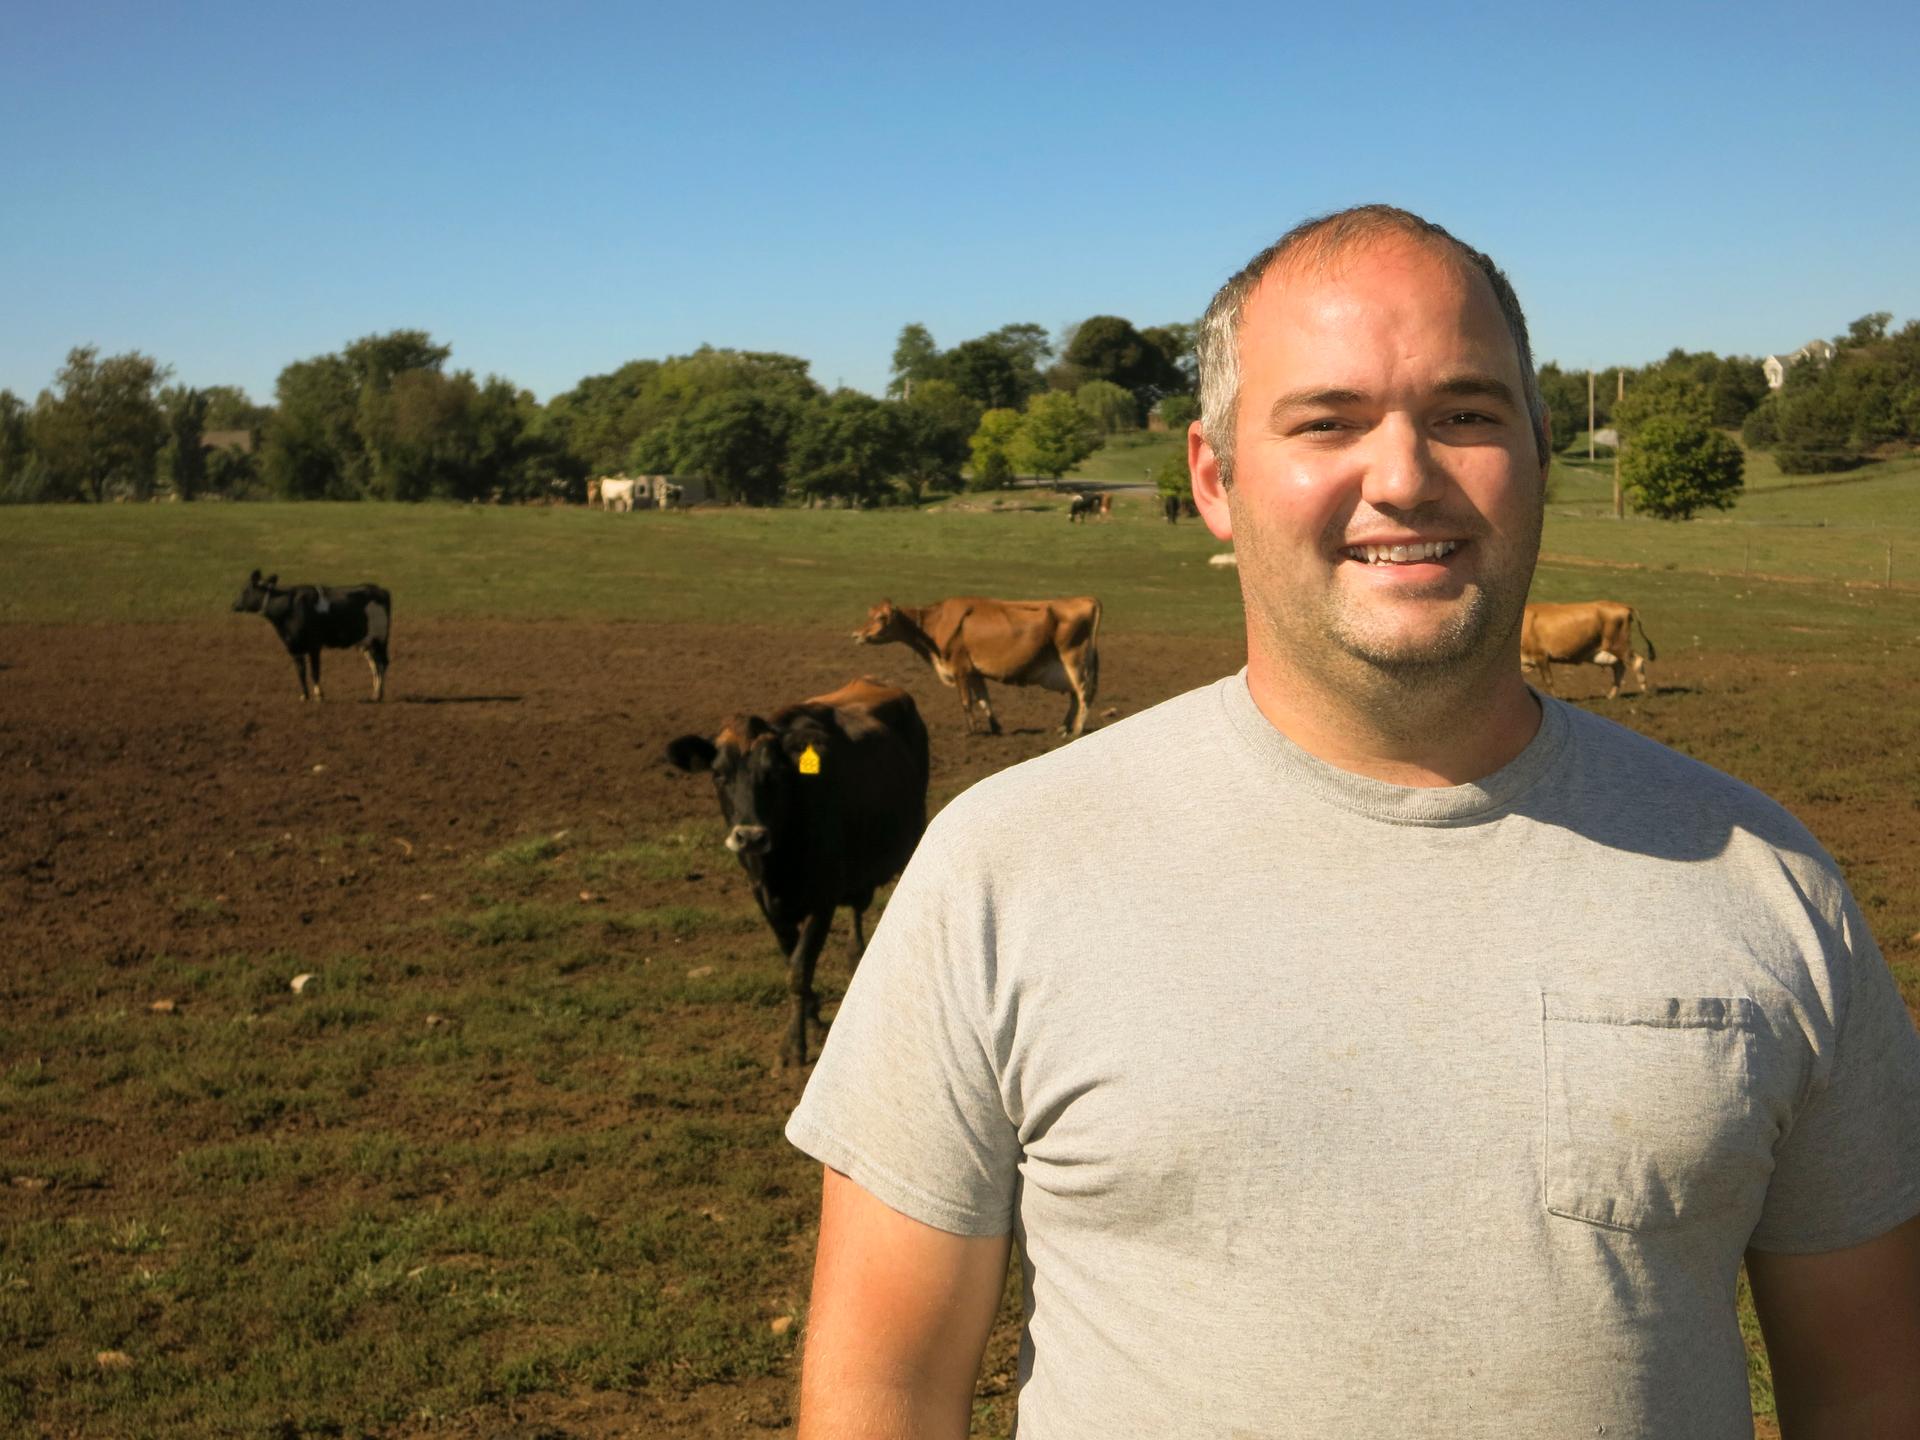 Mark Fulton's family has been milking cows in Pennsylvania since 1950.